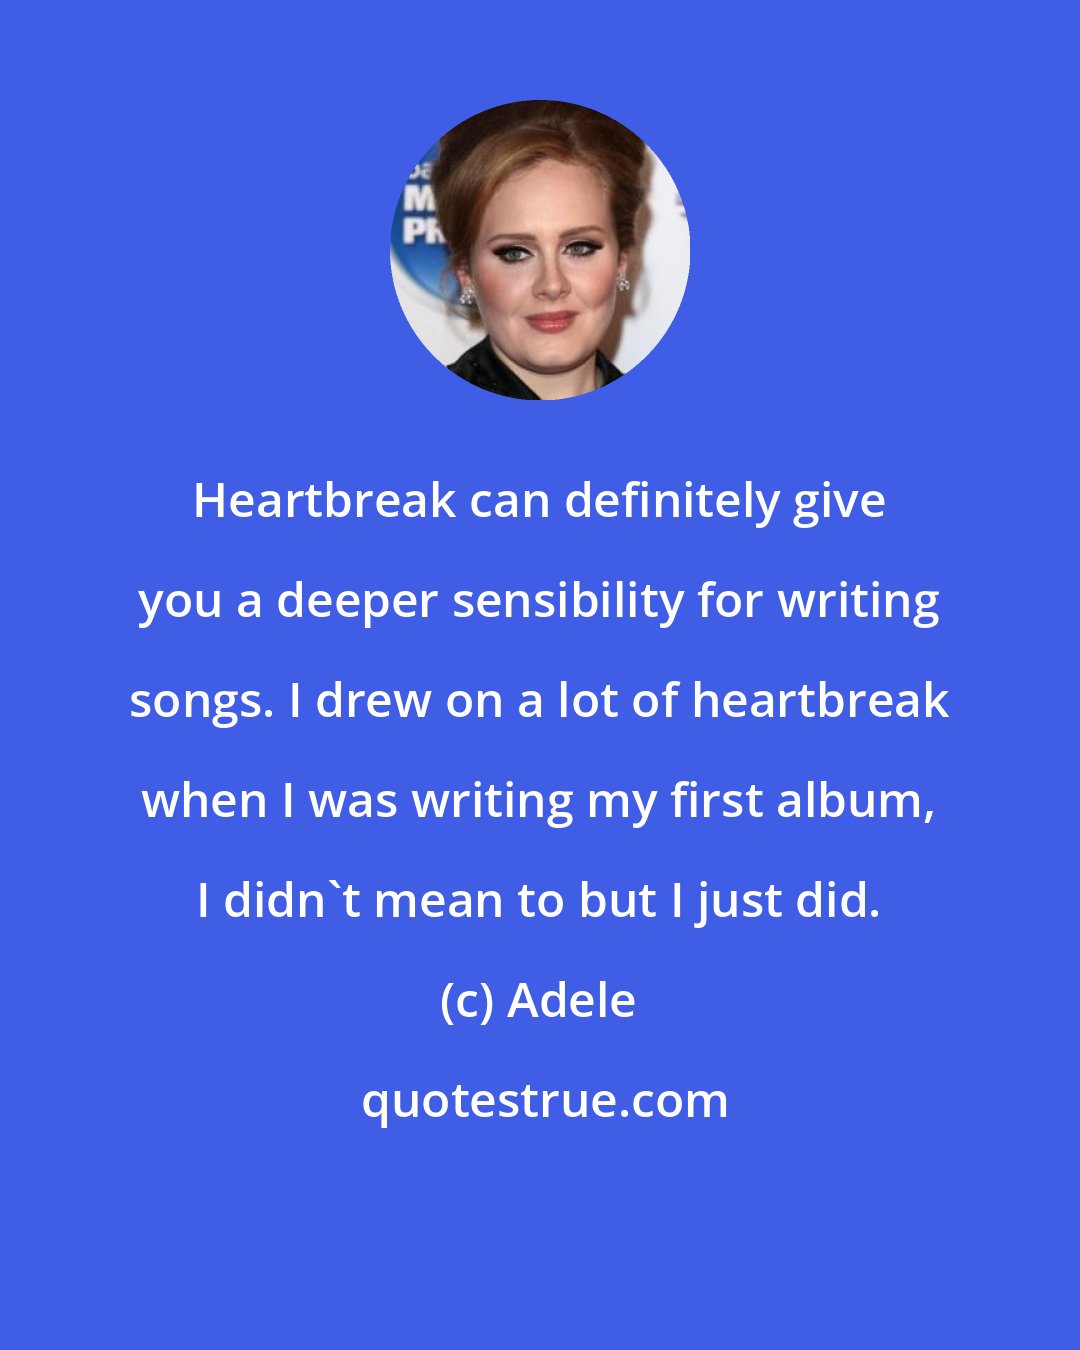 Adele: Heartbreak can definitely give you a deeper sensibility for writing songs. I drew on a lot of heartbreak when I was writing my first album, I didn't mean to but I just did.